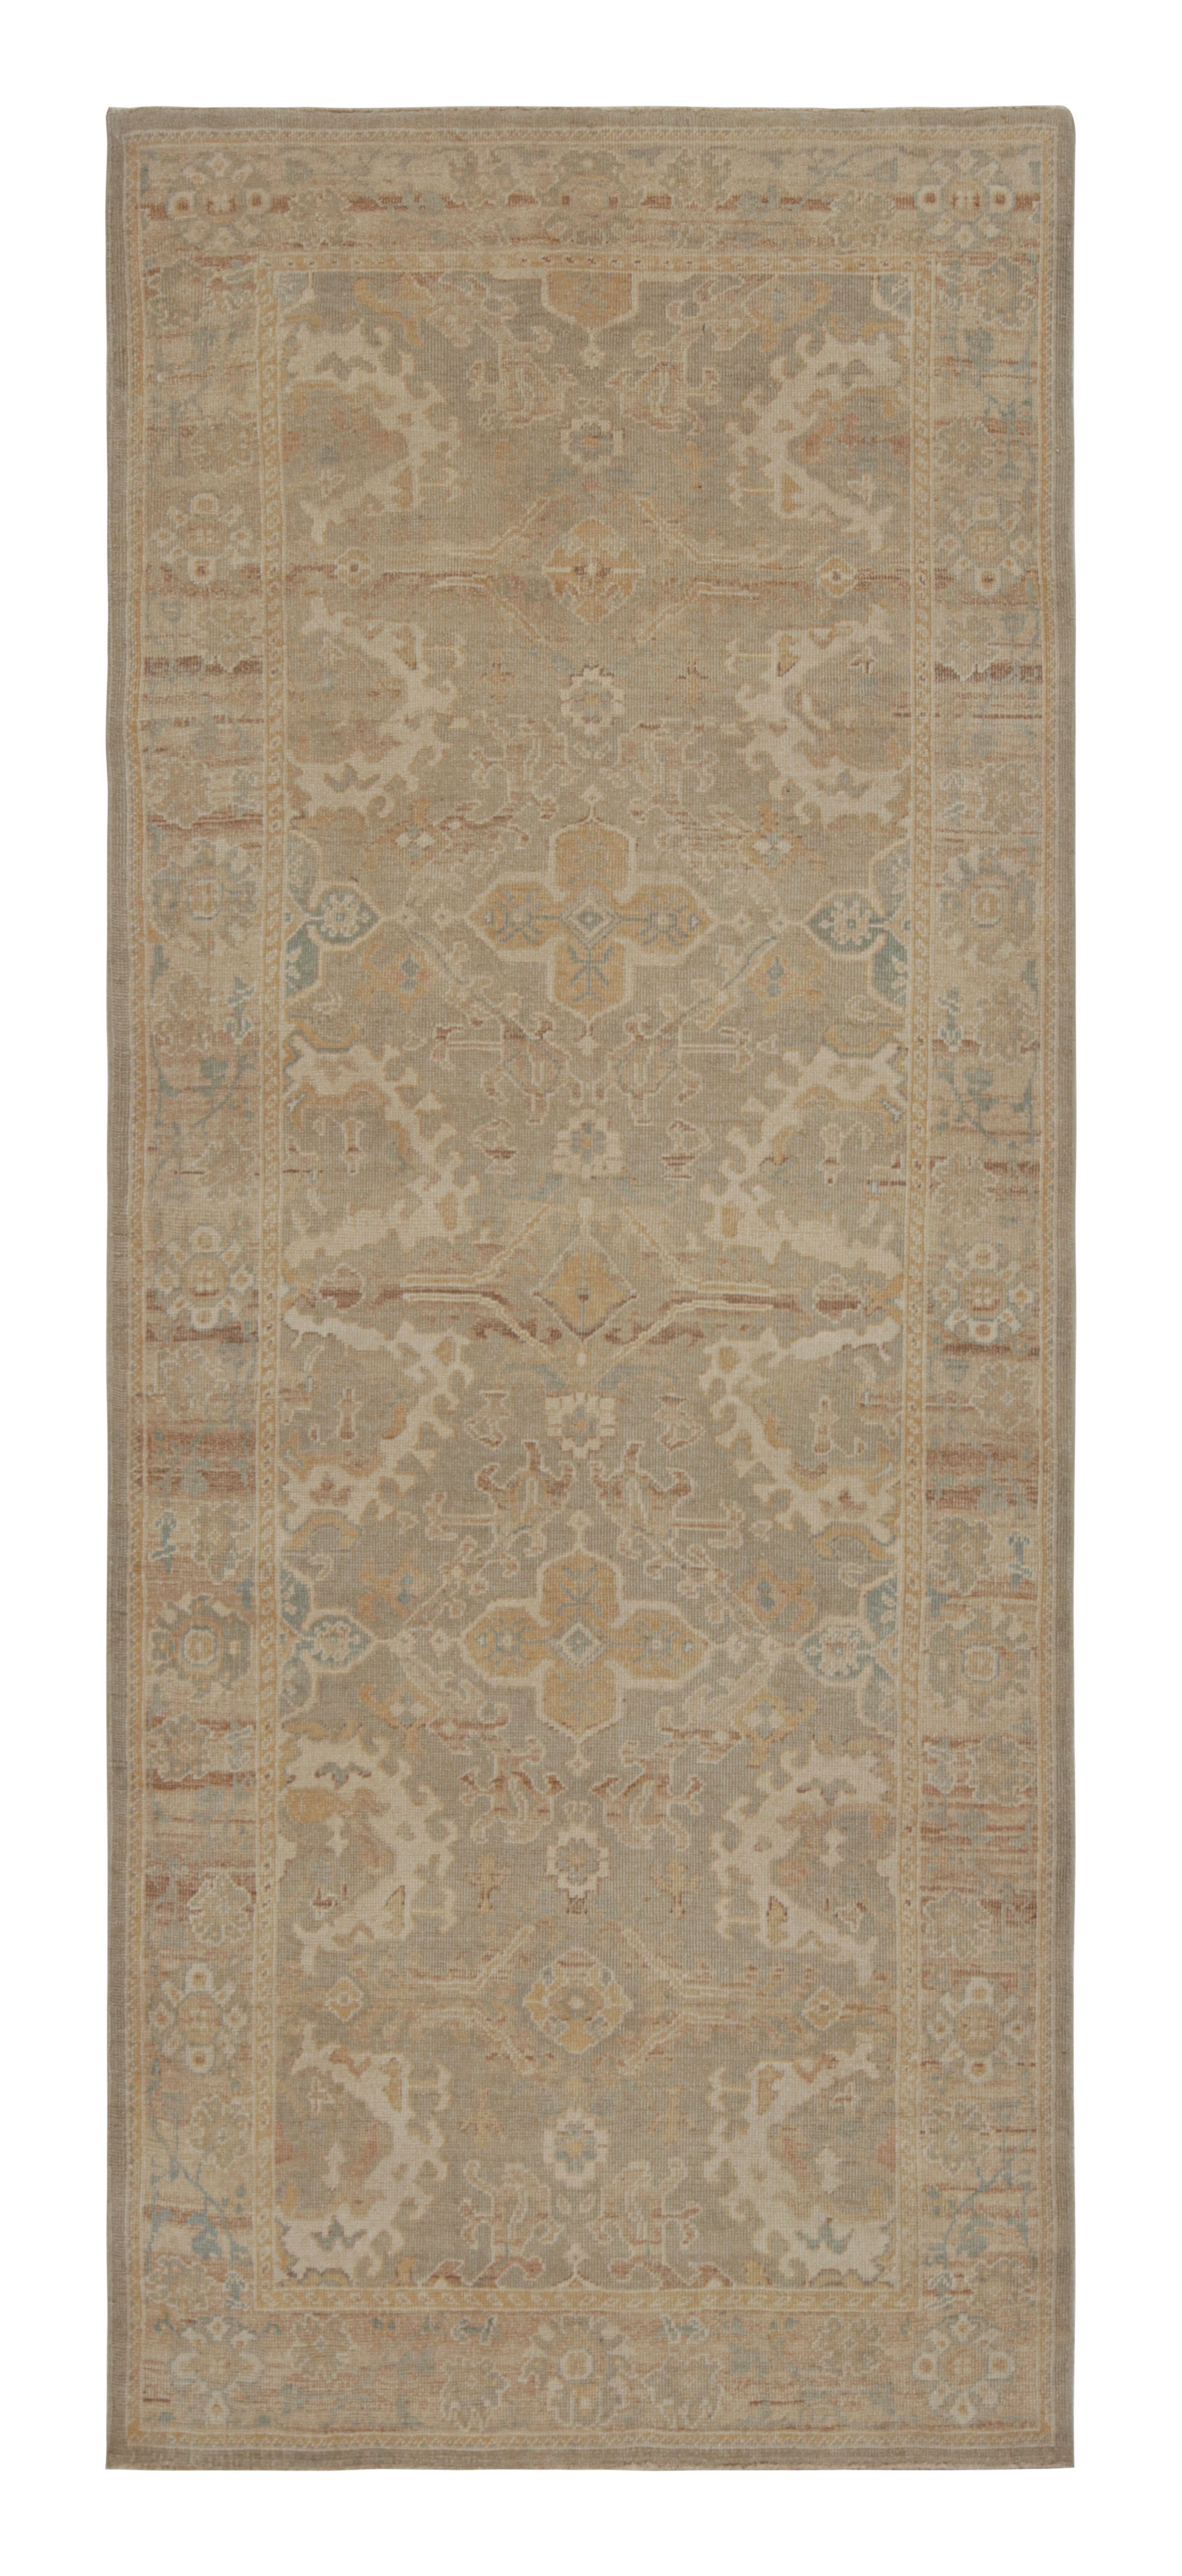 Rug & Kilim’s Khotan Style Rug in an All over Beige-Brown Floral Pattern